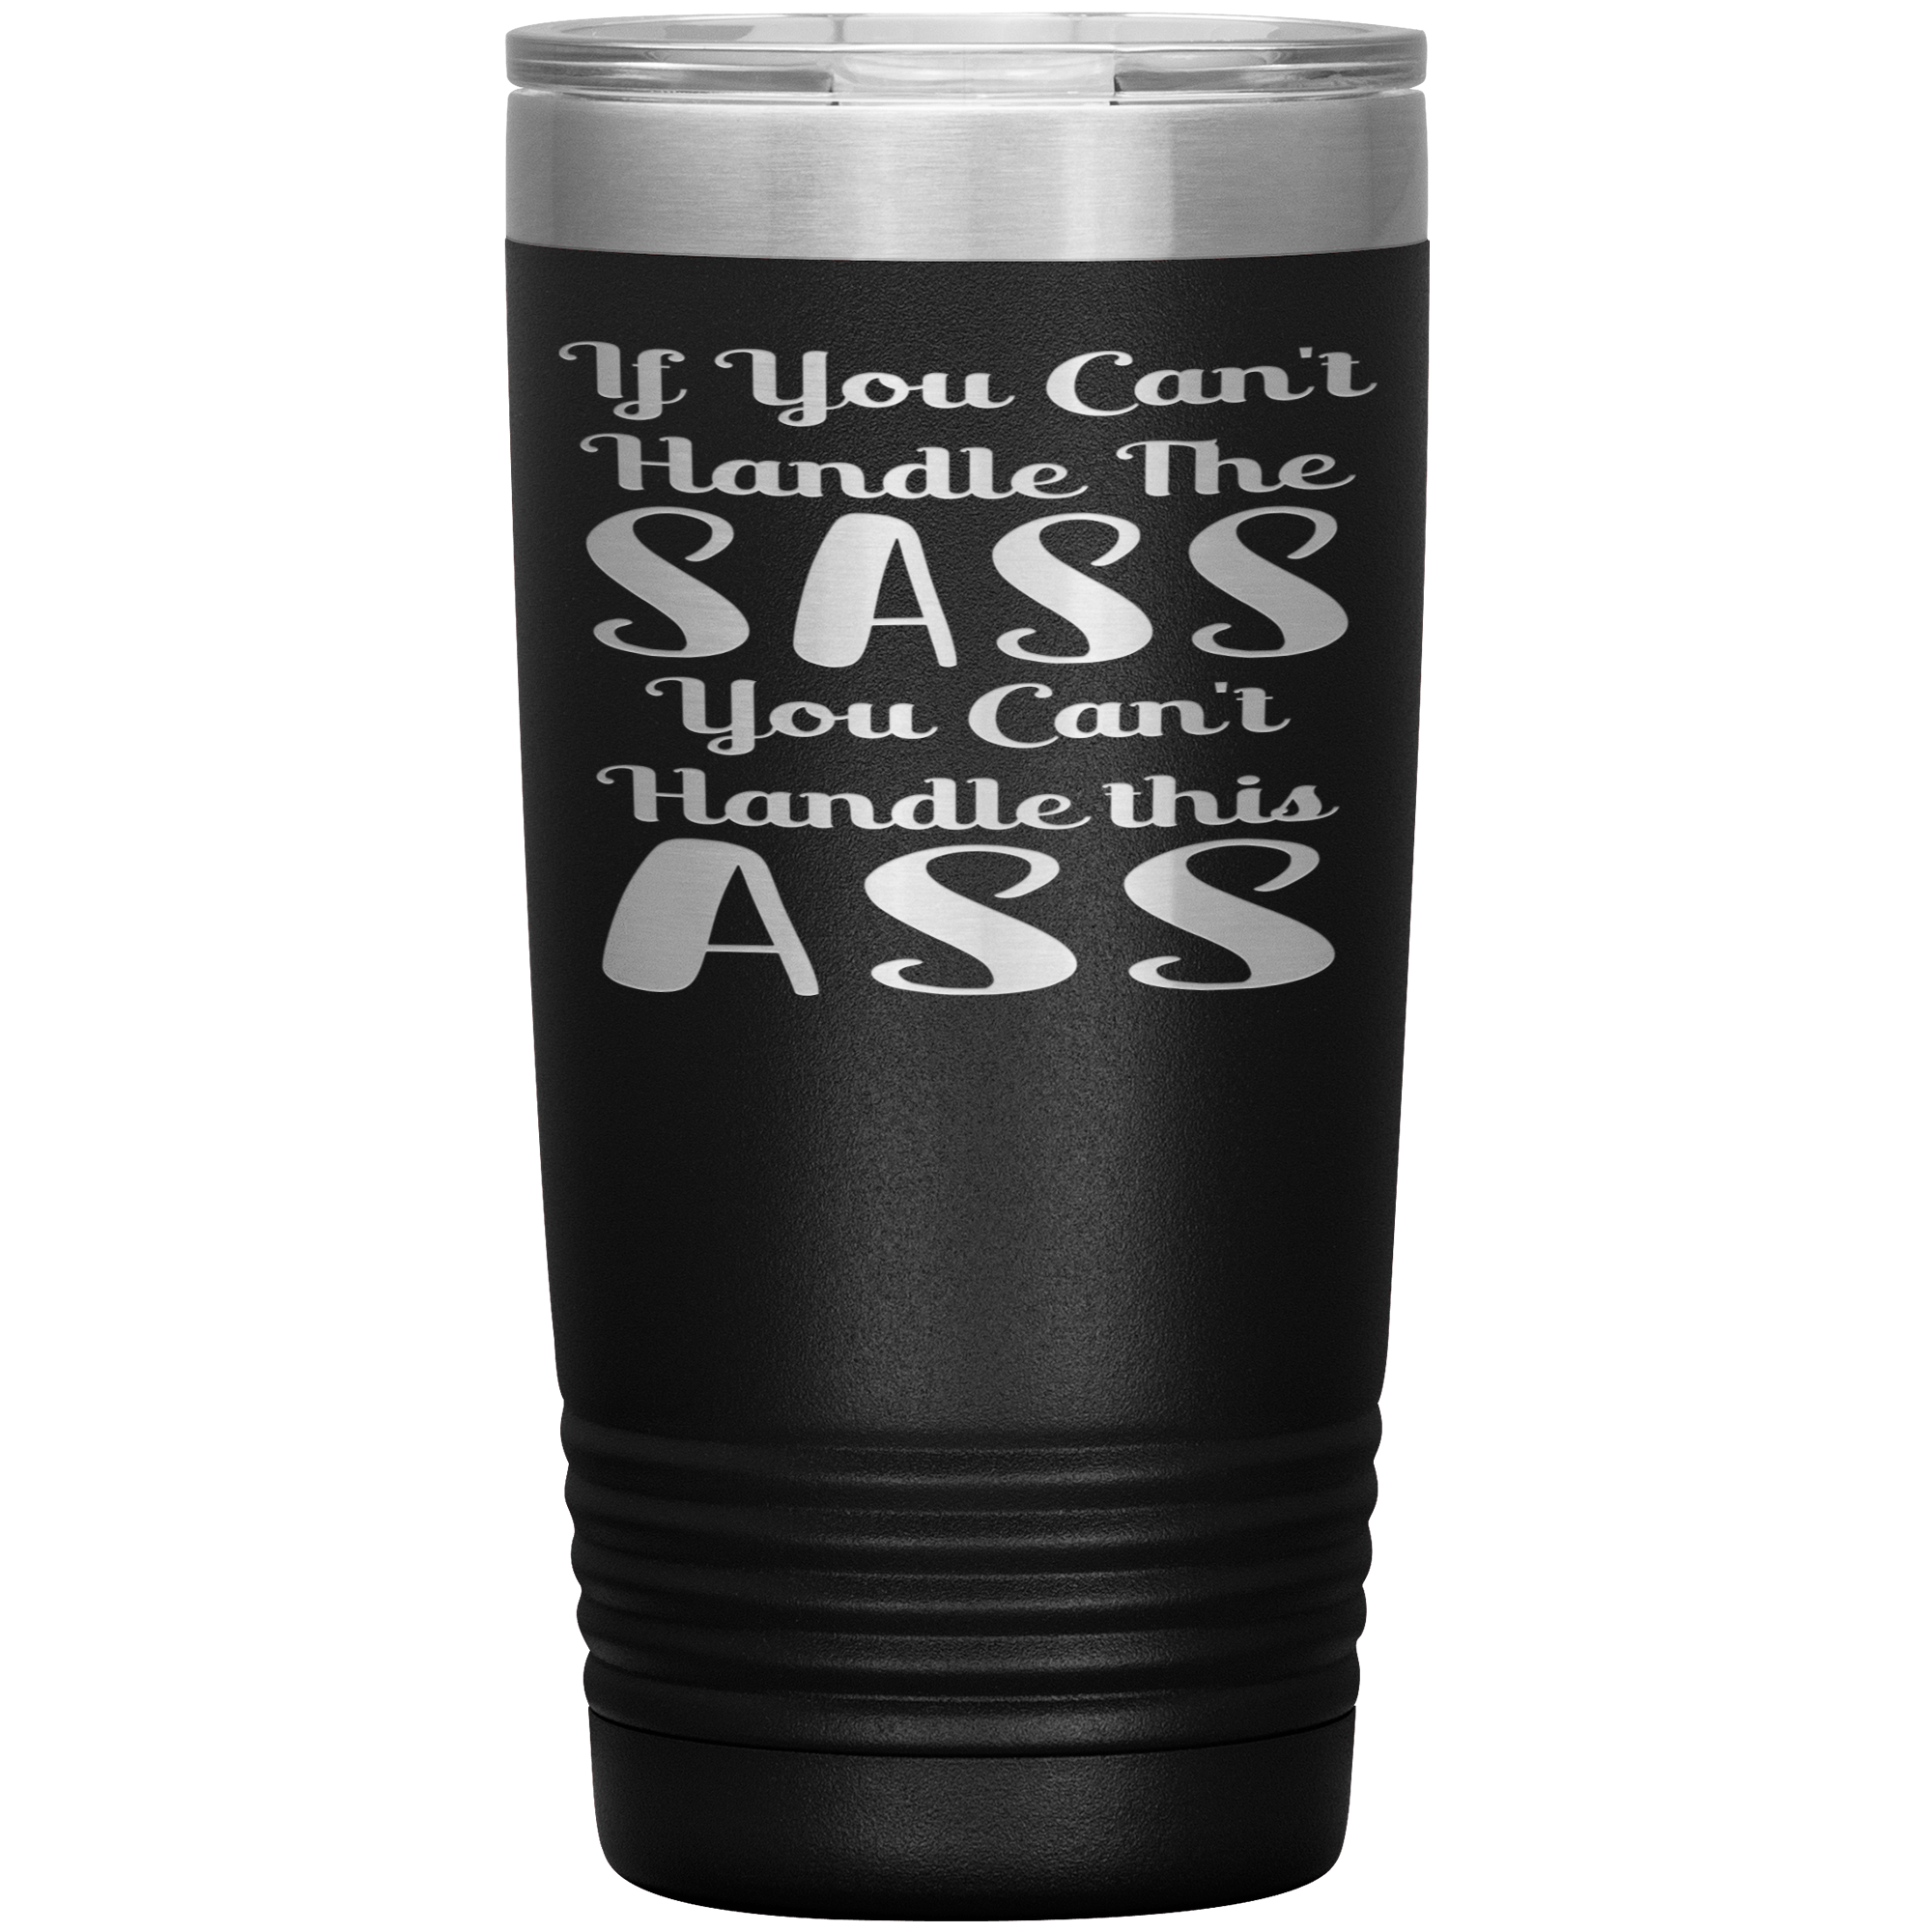 " IF YOU CAN'T HANDLE THE SASS YOU CAN'T HANDLE THIS  ASS " TUMBLER